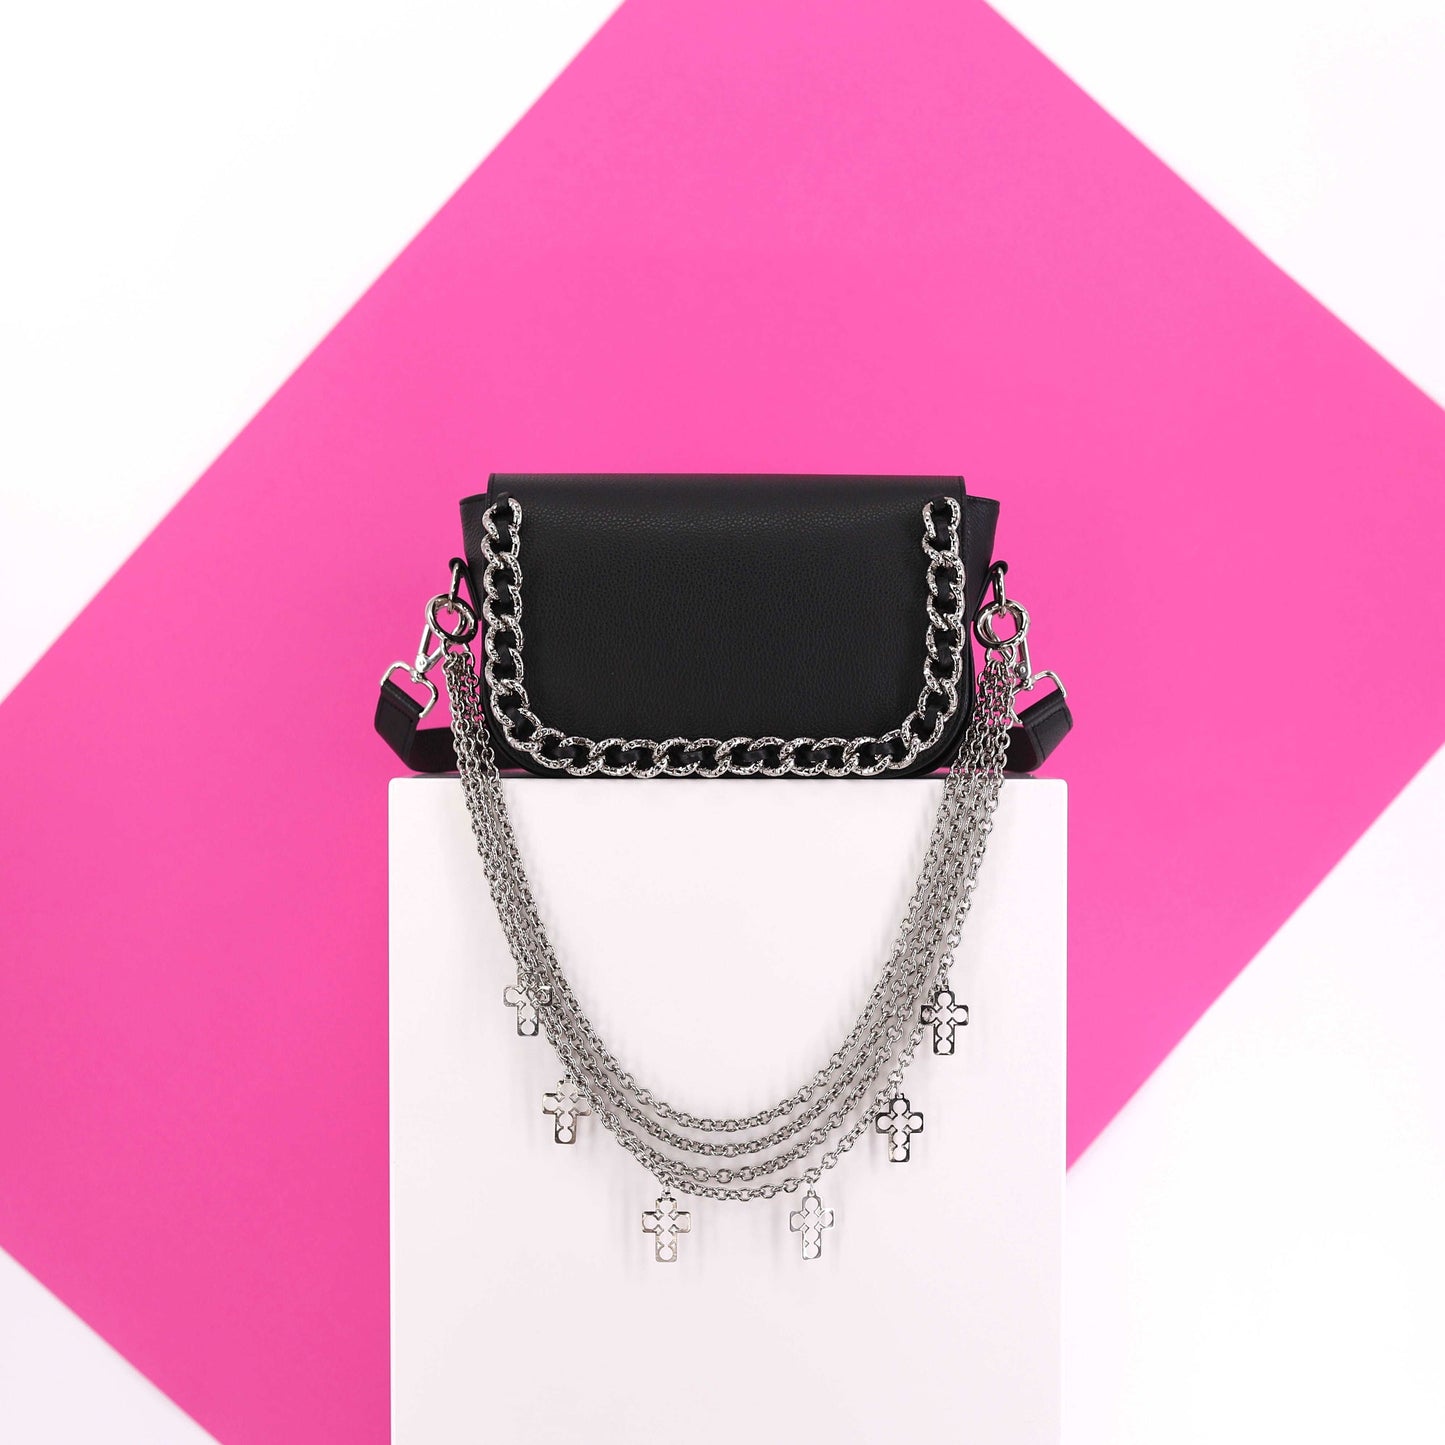 CHAIN ME UP flap genuine leather black with silver chain small